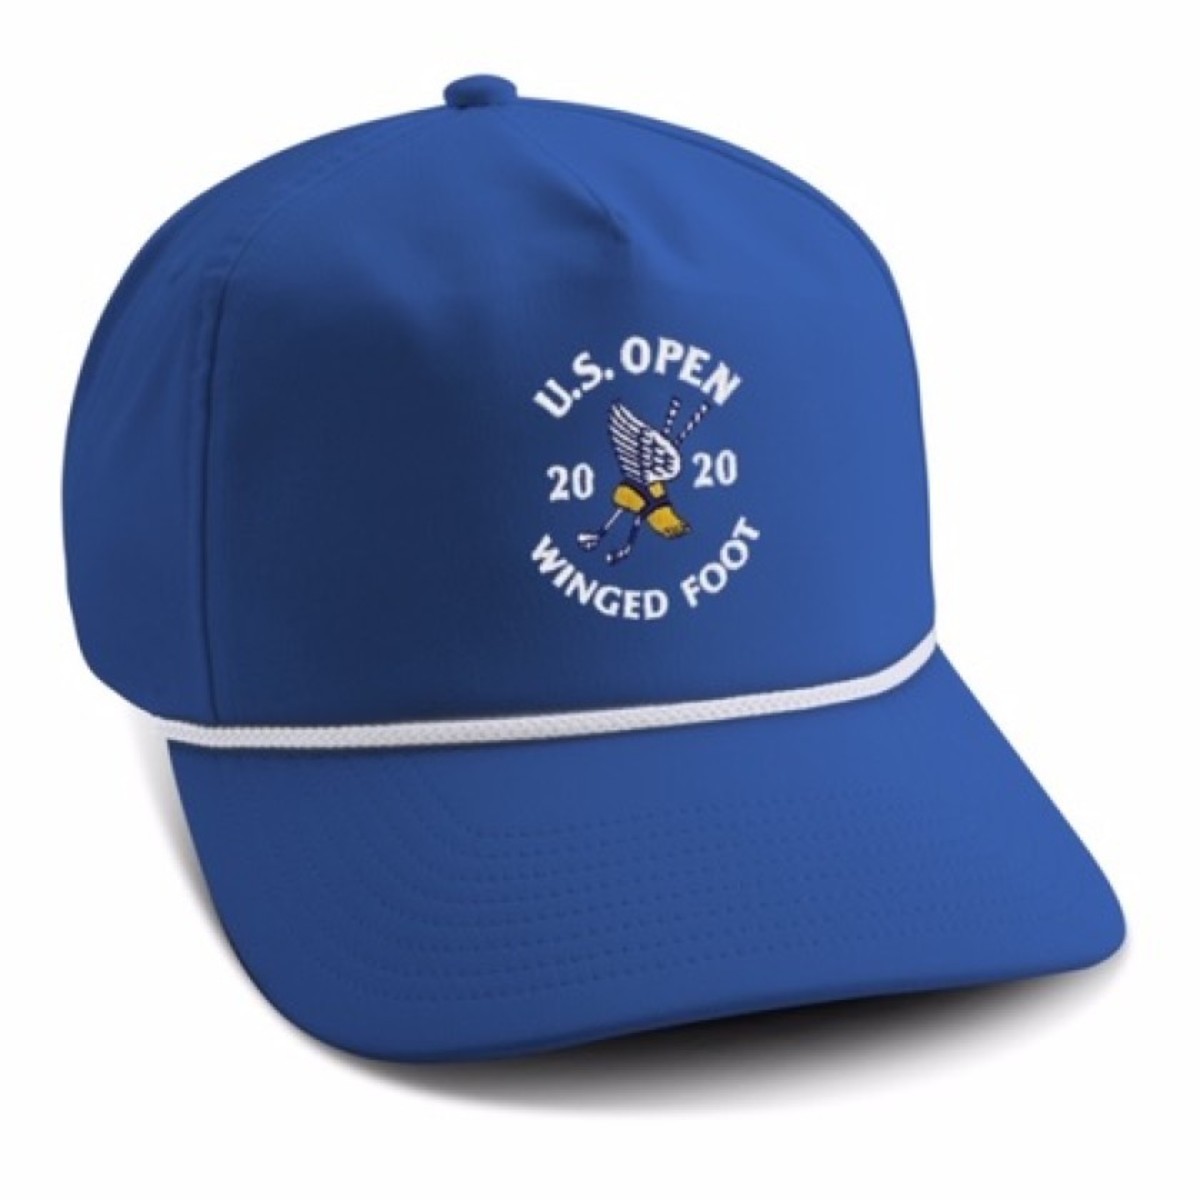 Imperial Headwear's variety of caps, visors and bucket hats is vast, and includes 2020 U.S. Open Winged Foot caps.